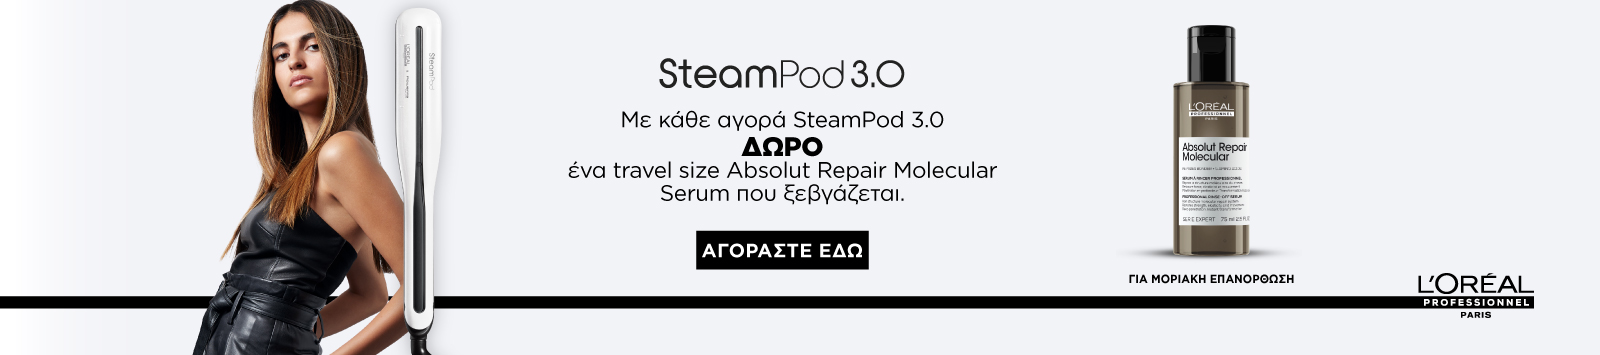 Loreal STEAMPOD3 offer